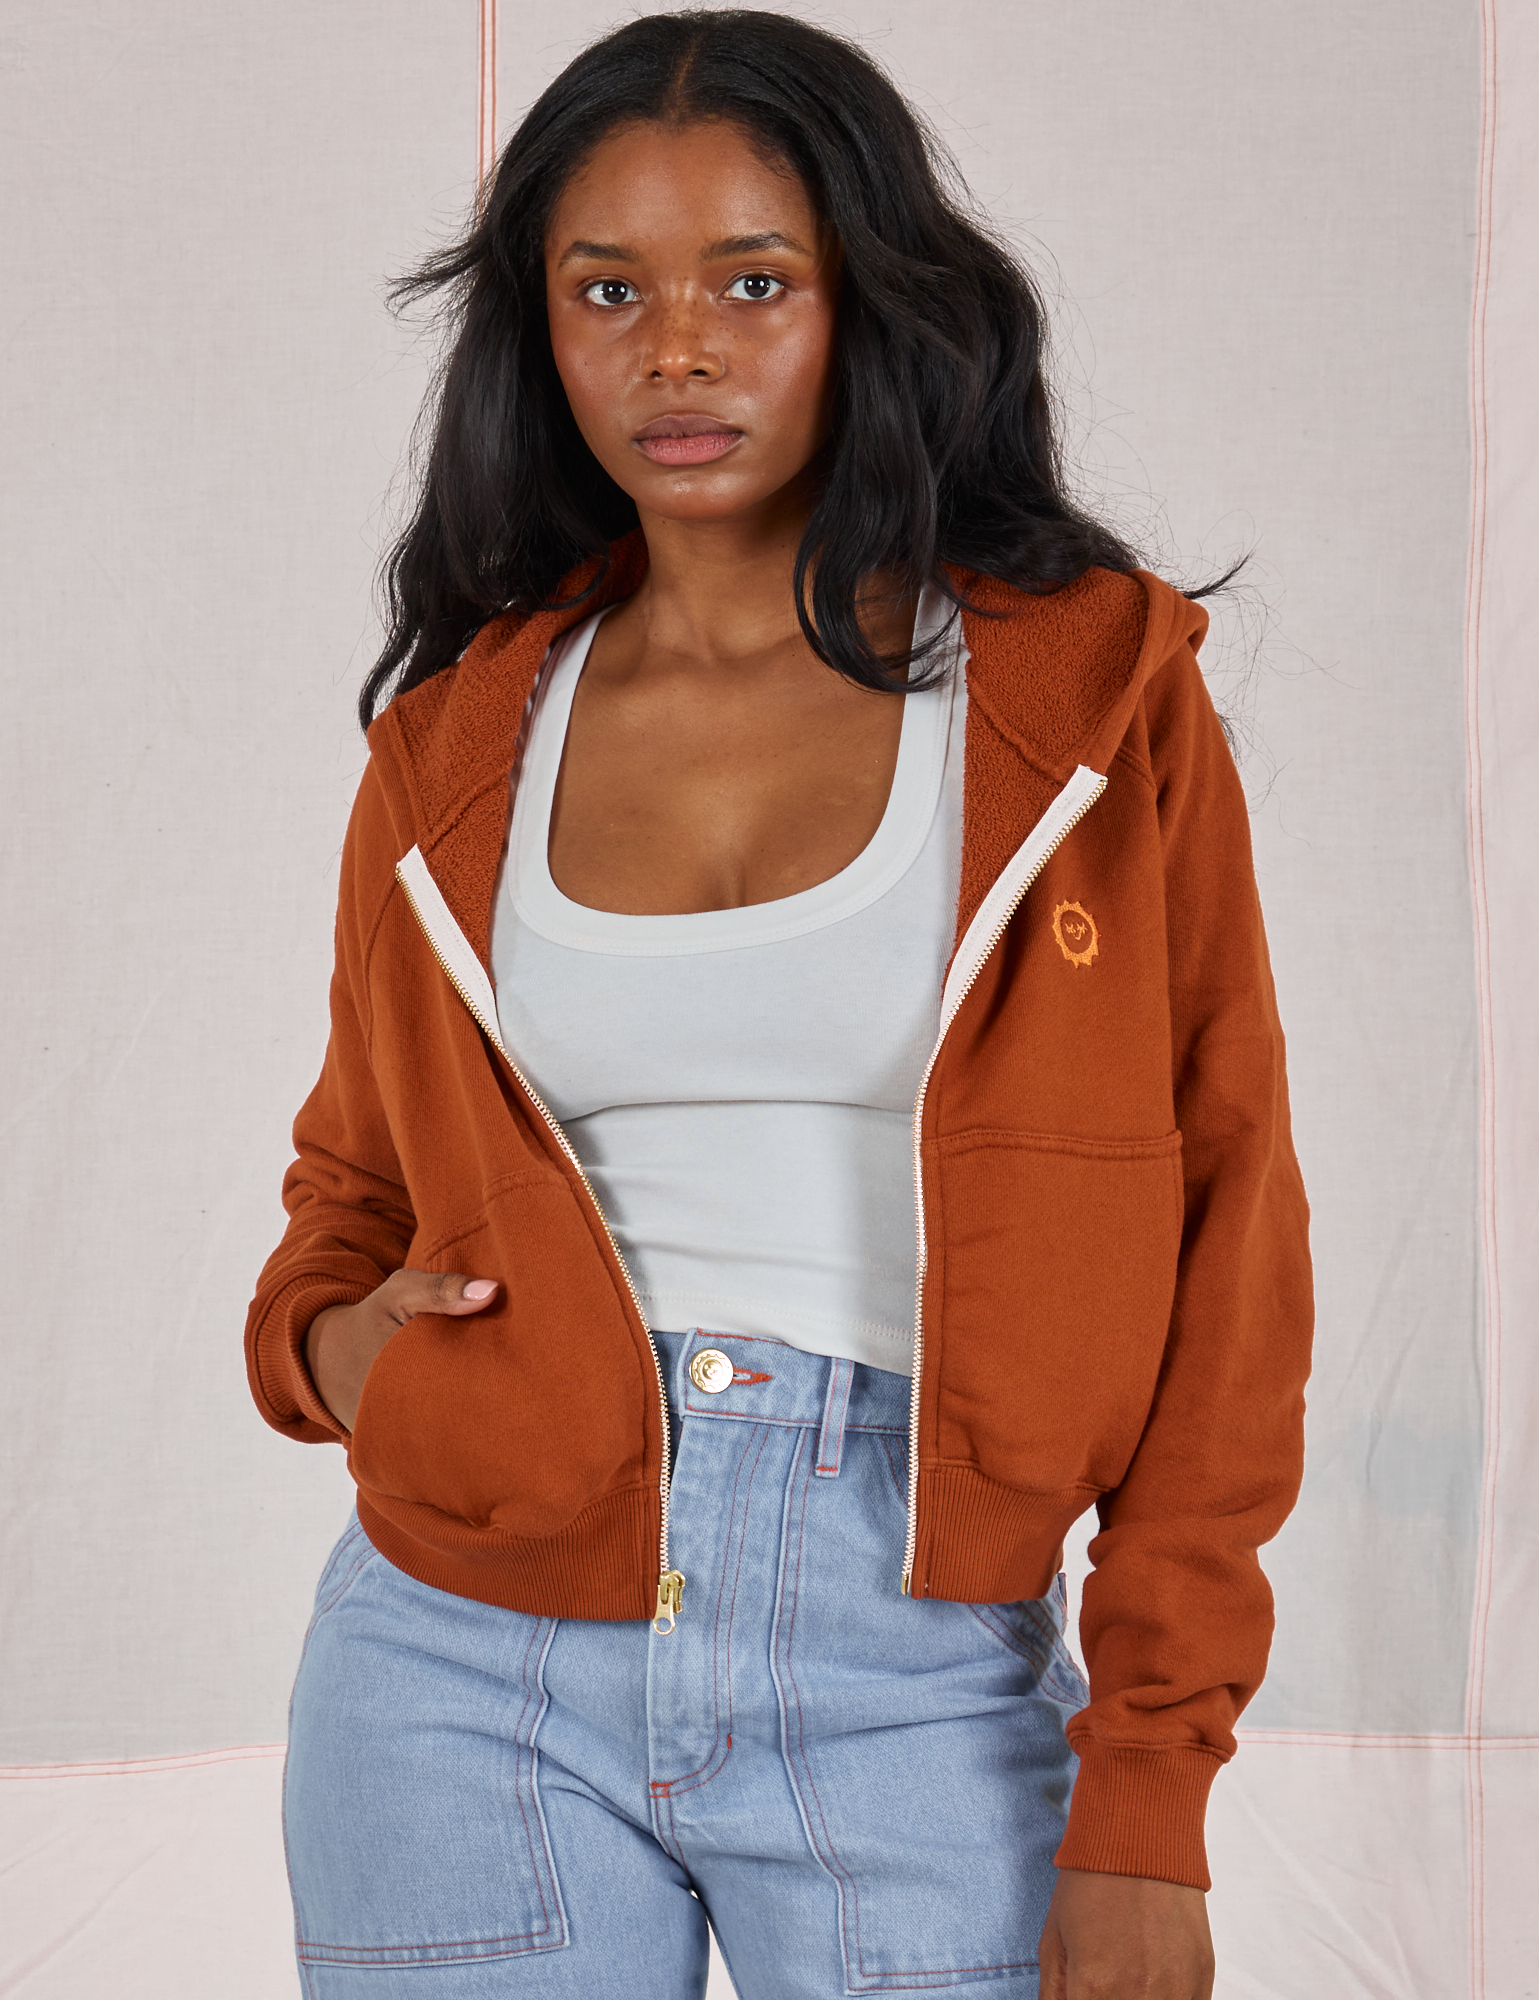 Kandia is 5&#39;3&quot; and wearing P Cropped Zip Hoodie in Burnt Terracotta paired with a vintage off-white Cropped Tank underneath